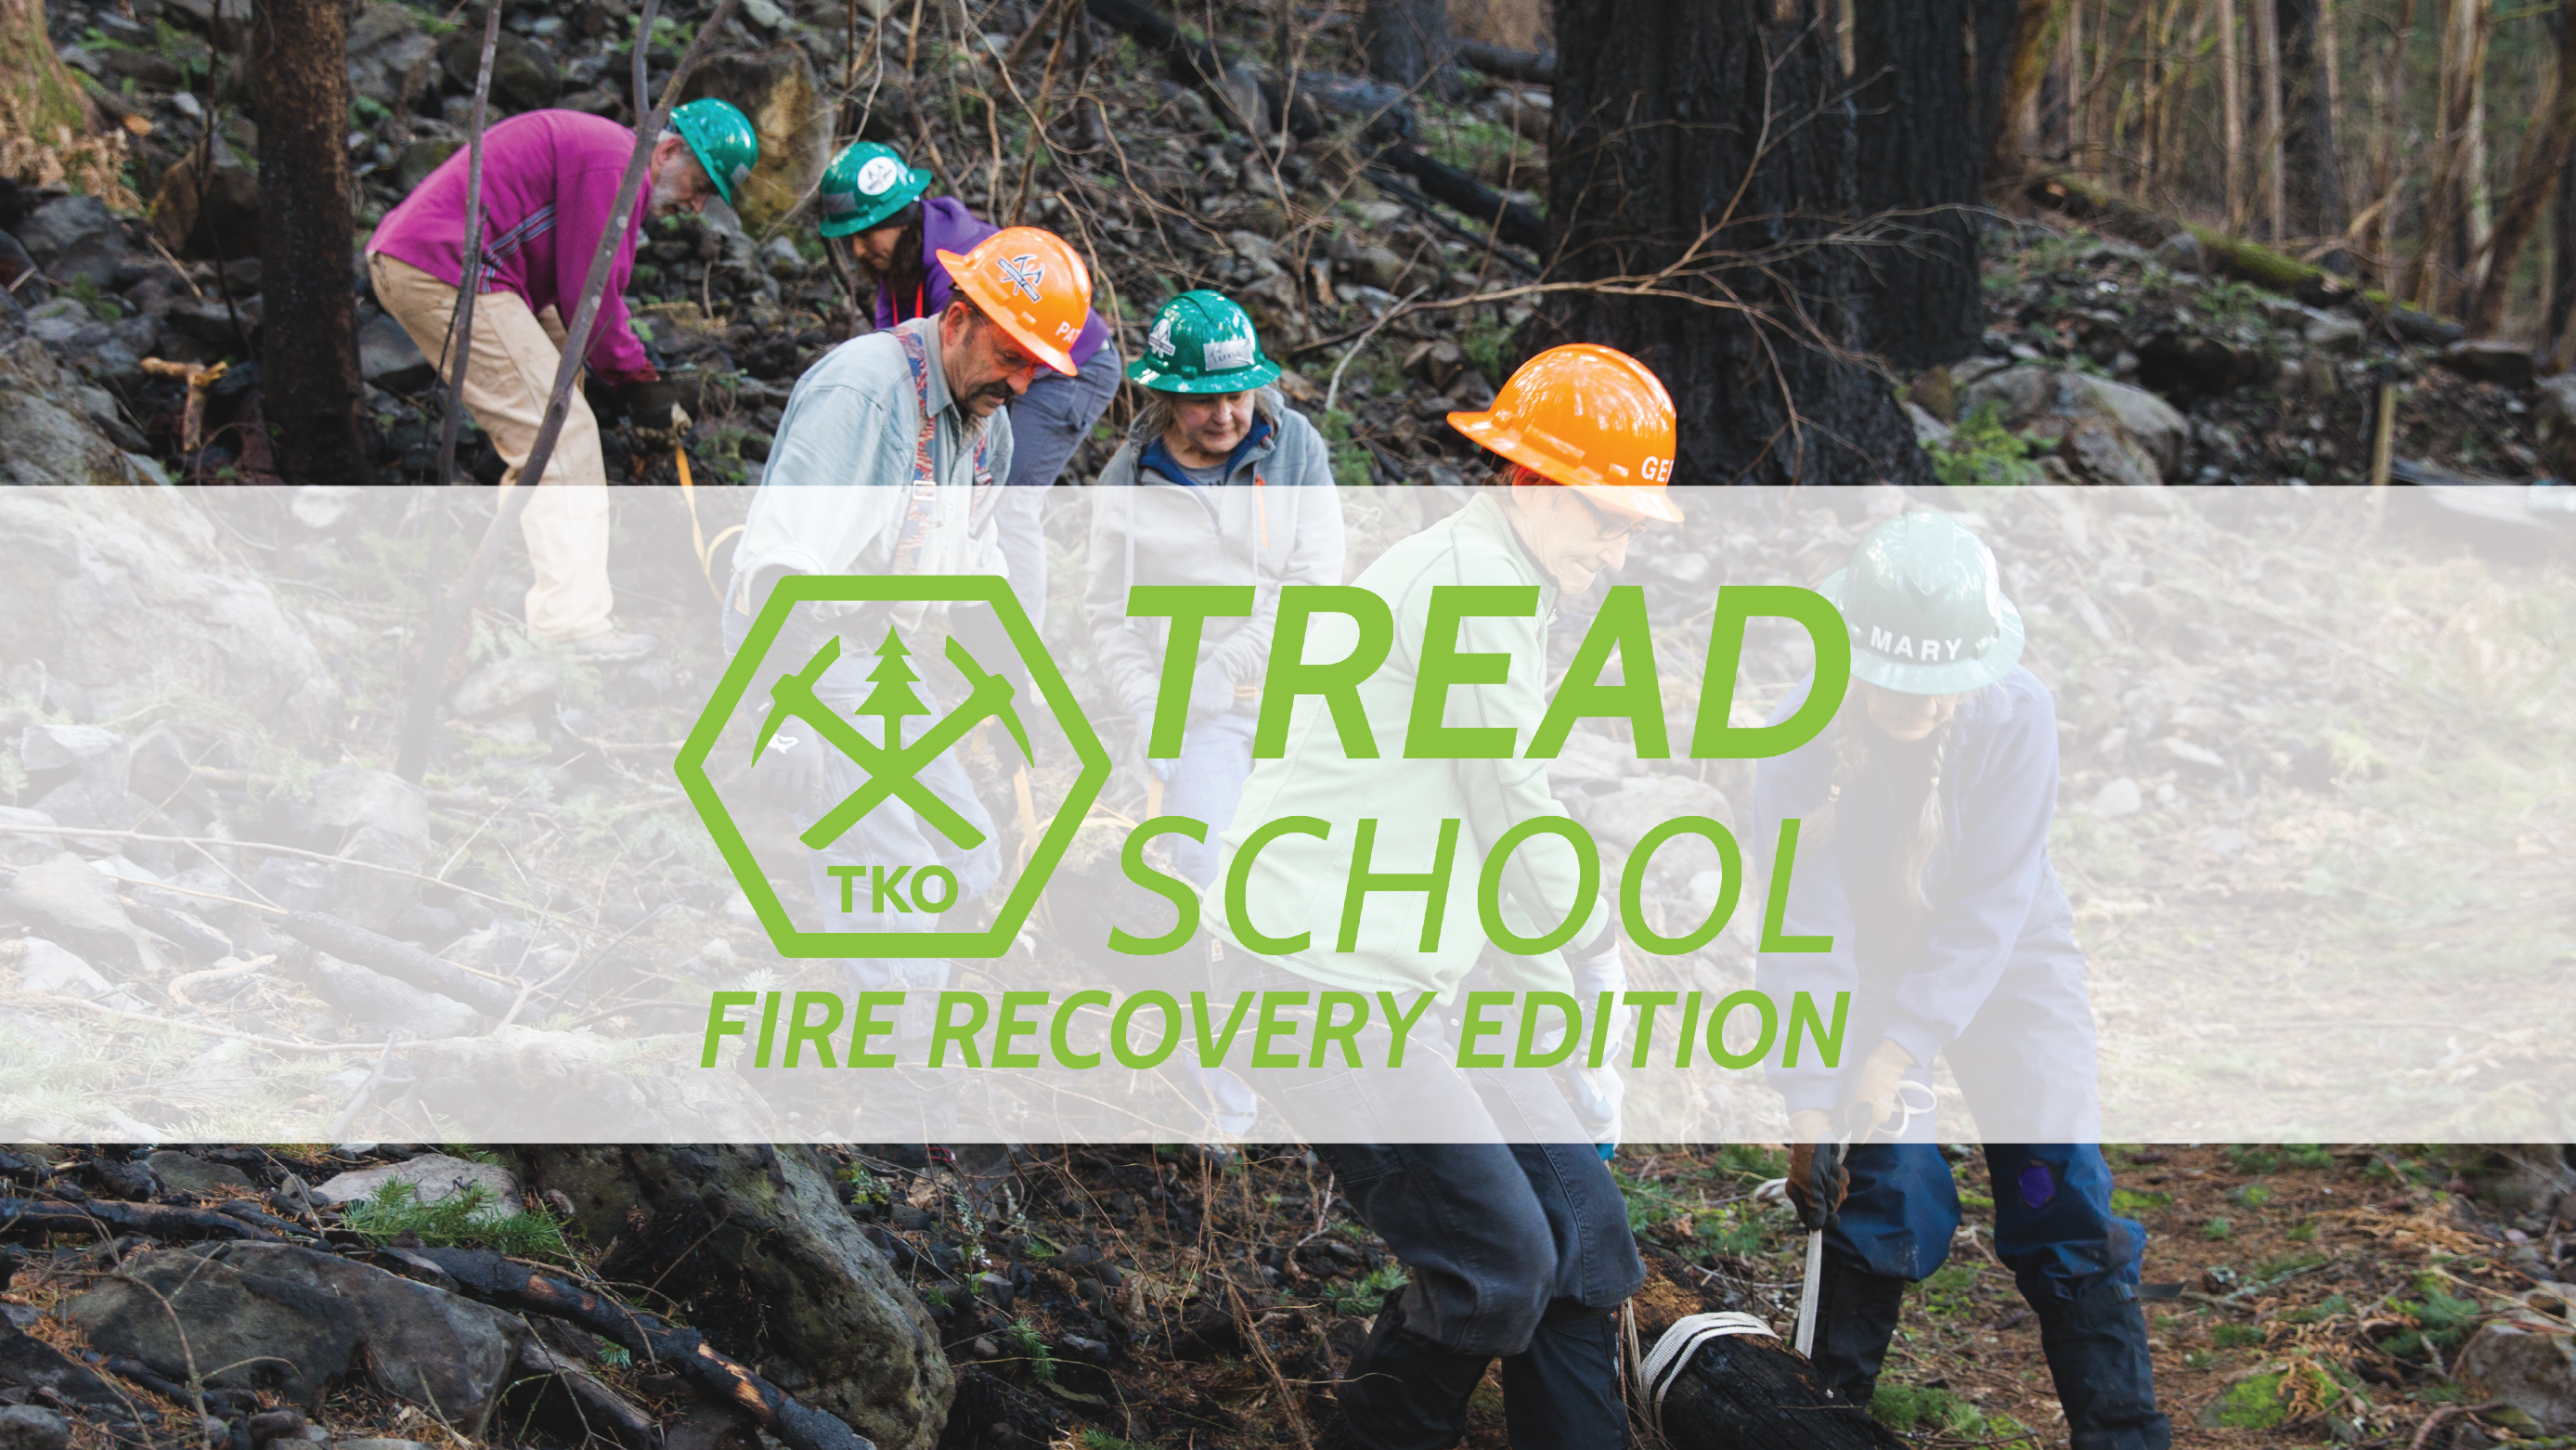 A photo of people in hard hats using straps to carry a burned log through a burned forest. Over this image are the words Tread School - Fire Recovery Edition